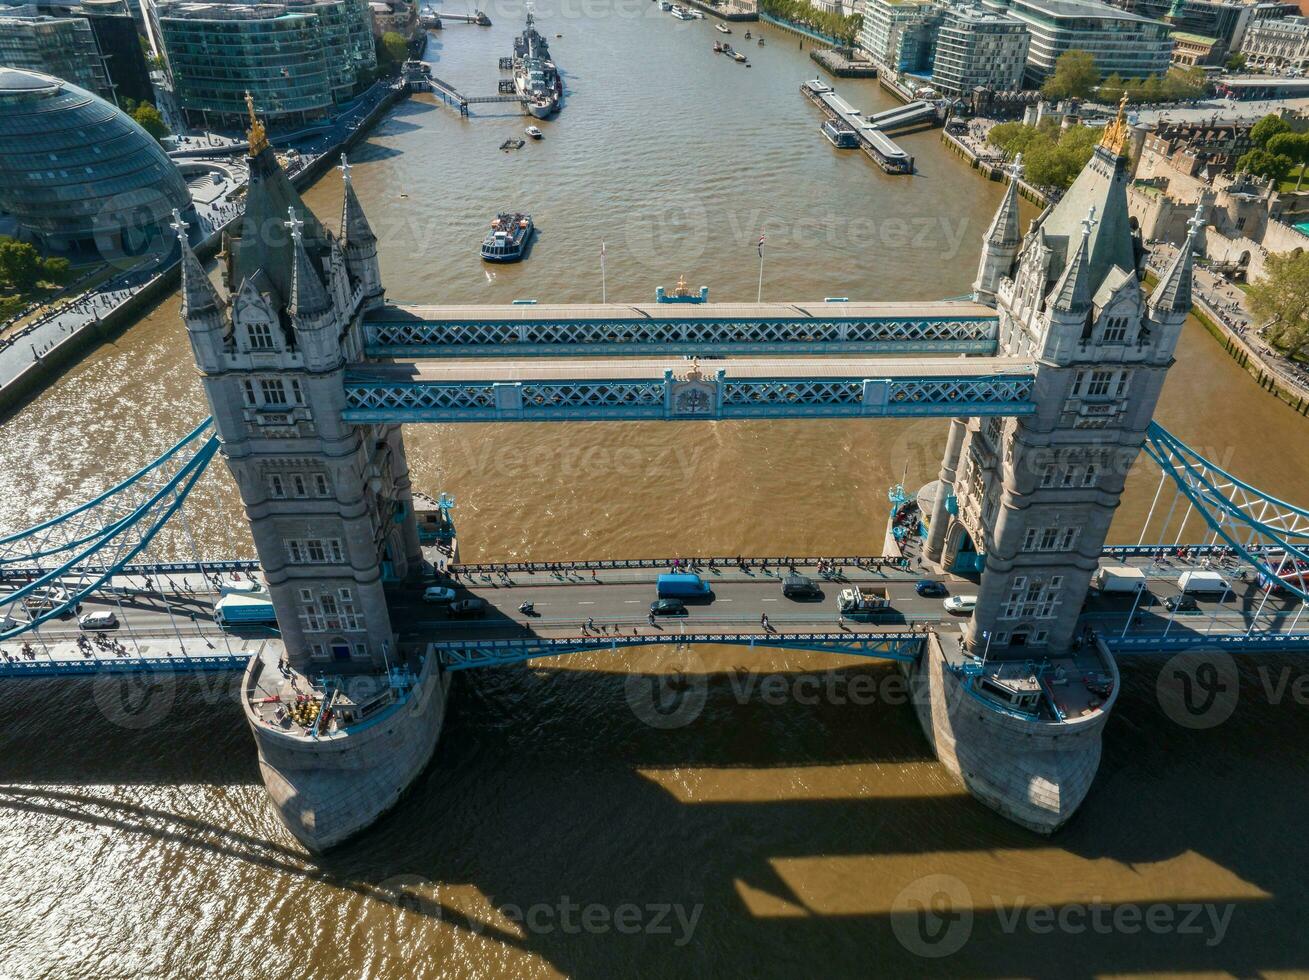 Iconic Tower Bridge connecting Londong with Southwark on the Thames River photo